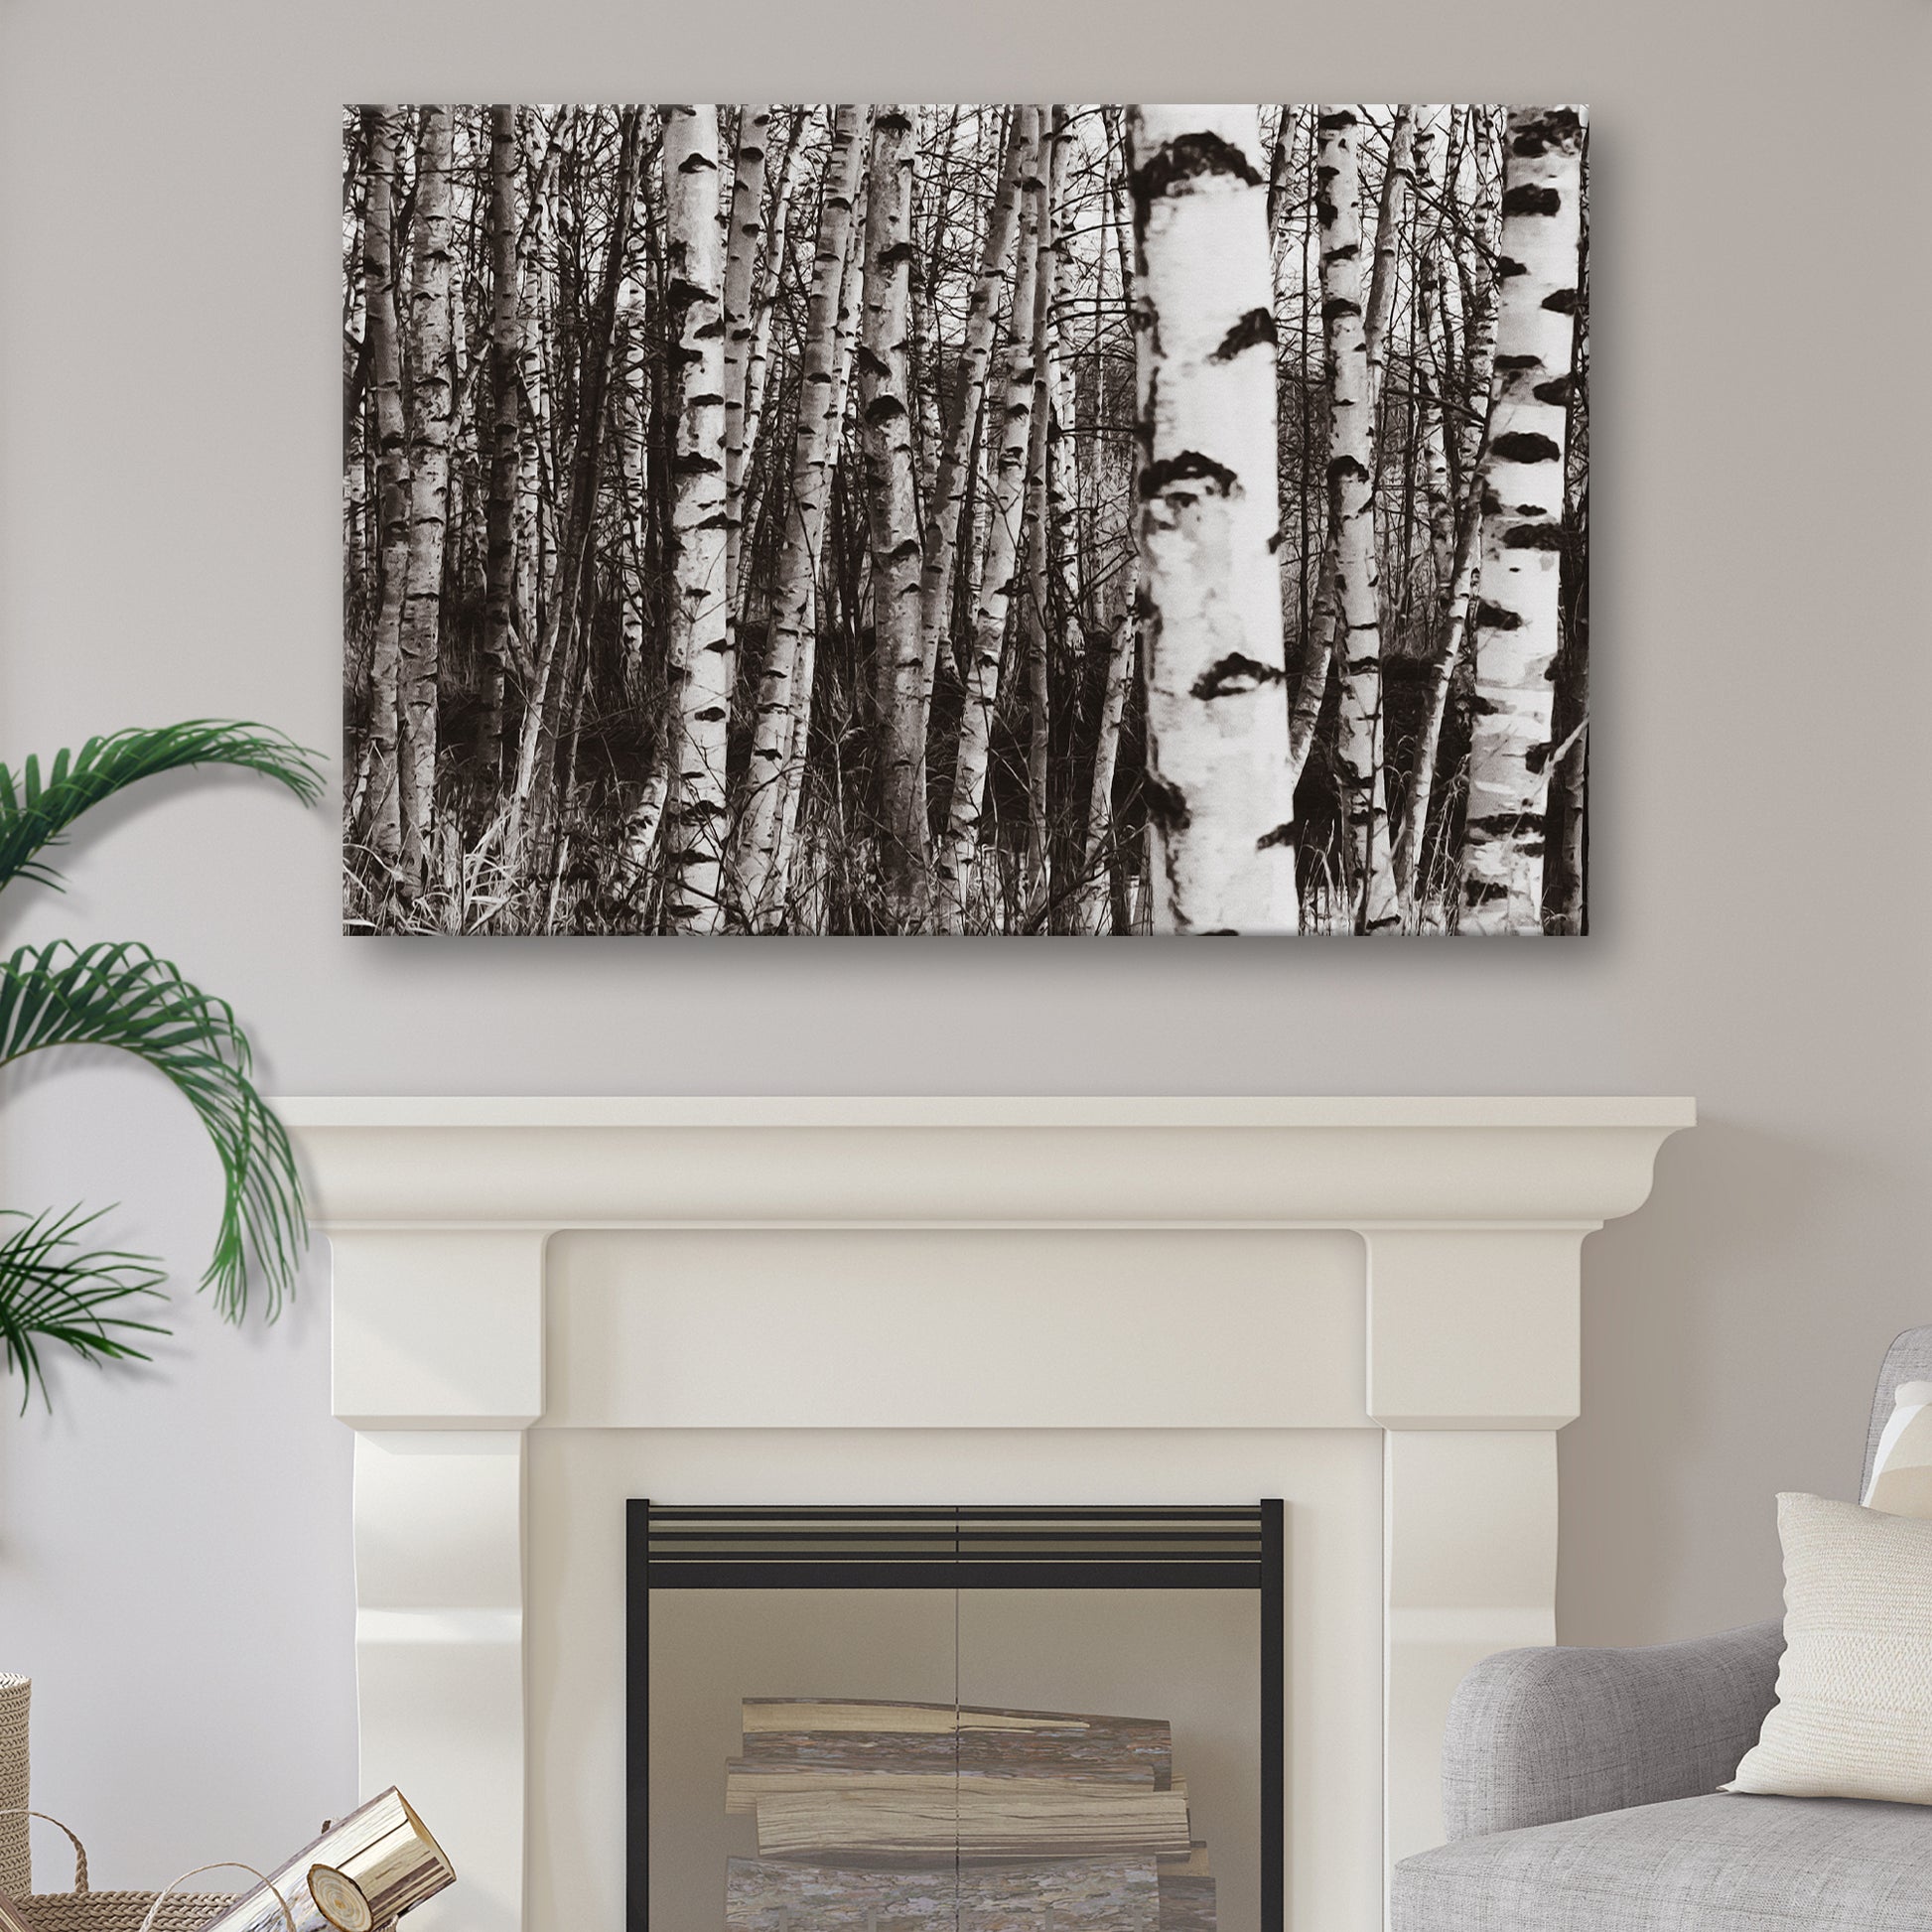 Grayscale Birch Tree Trunks Canvas Wall Art Style 2 - Image by Tailored Canvases